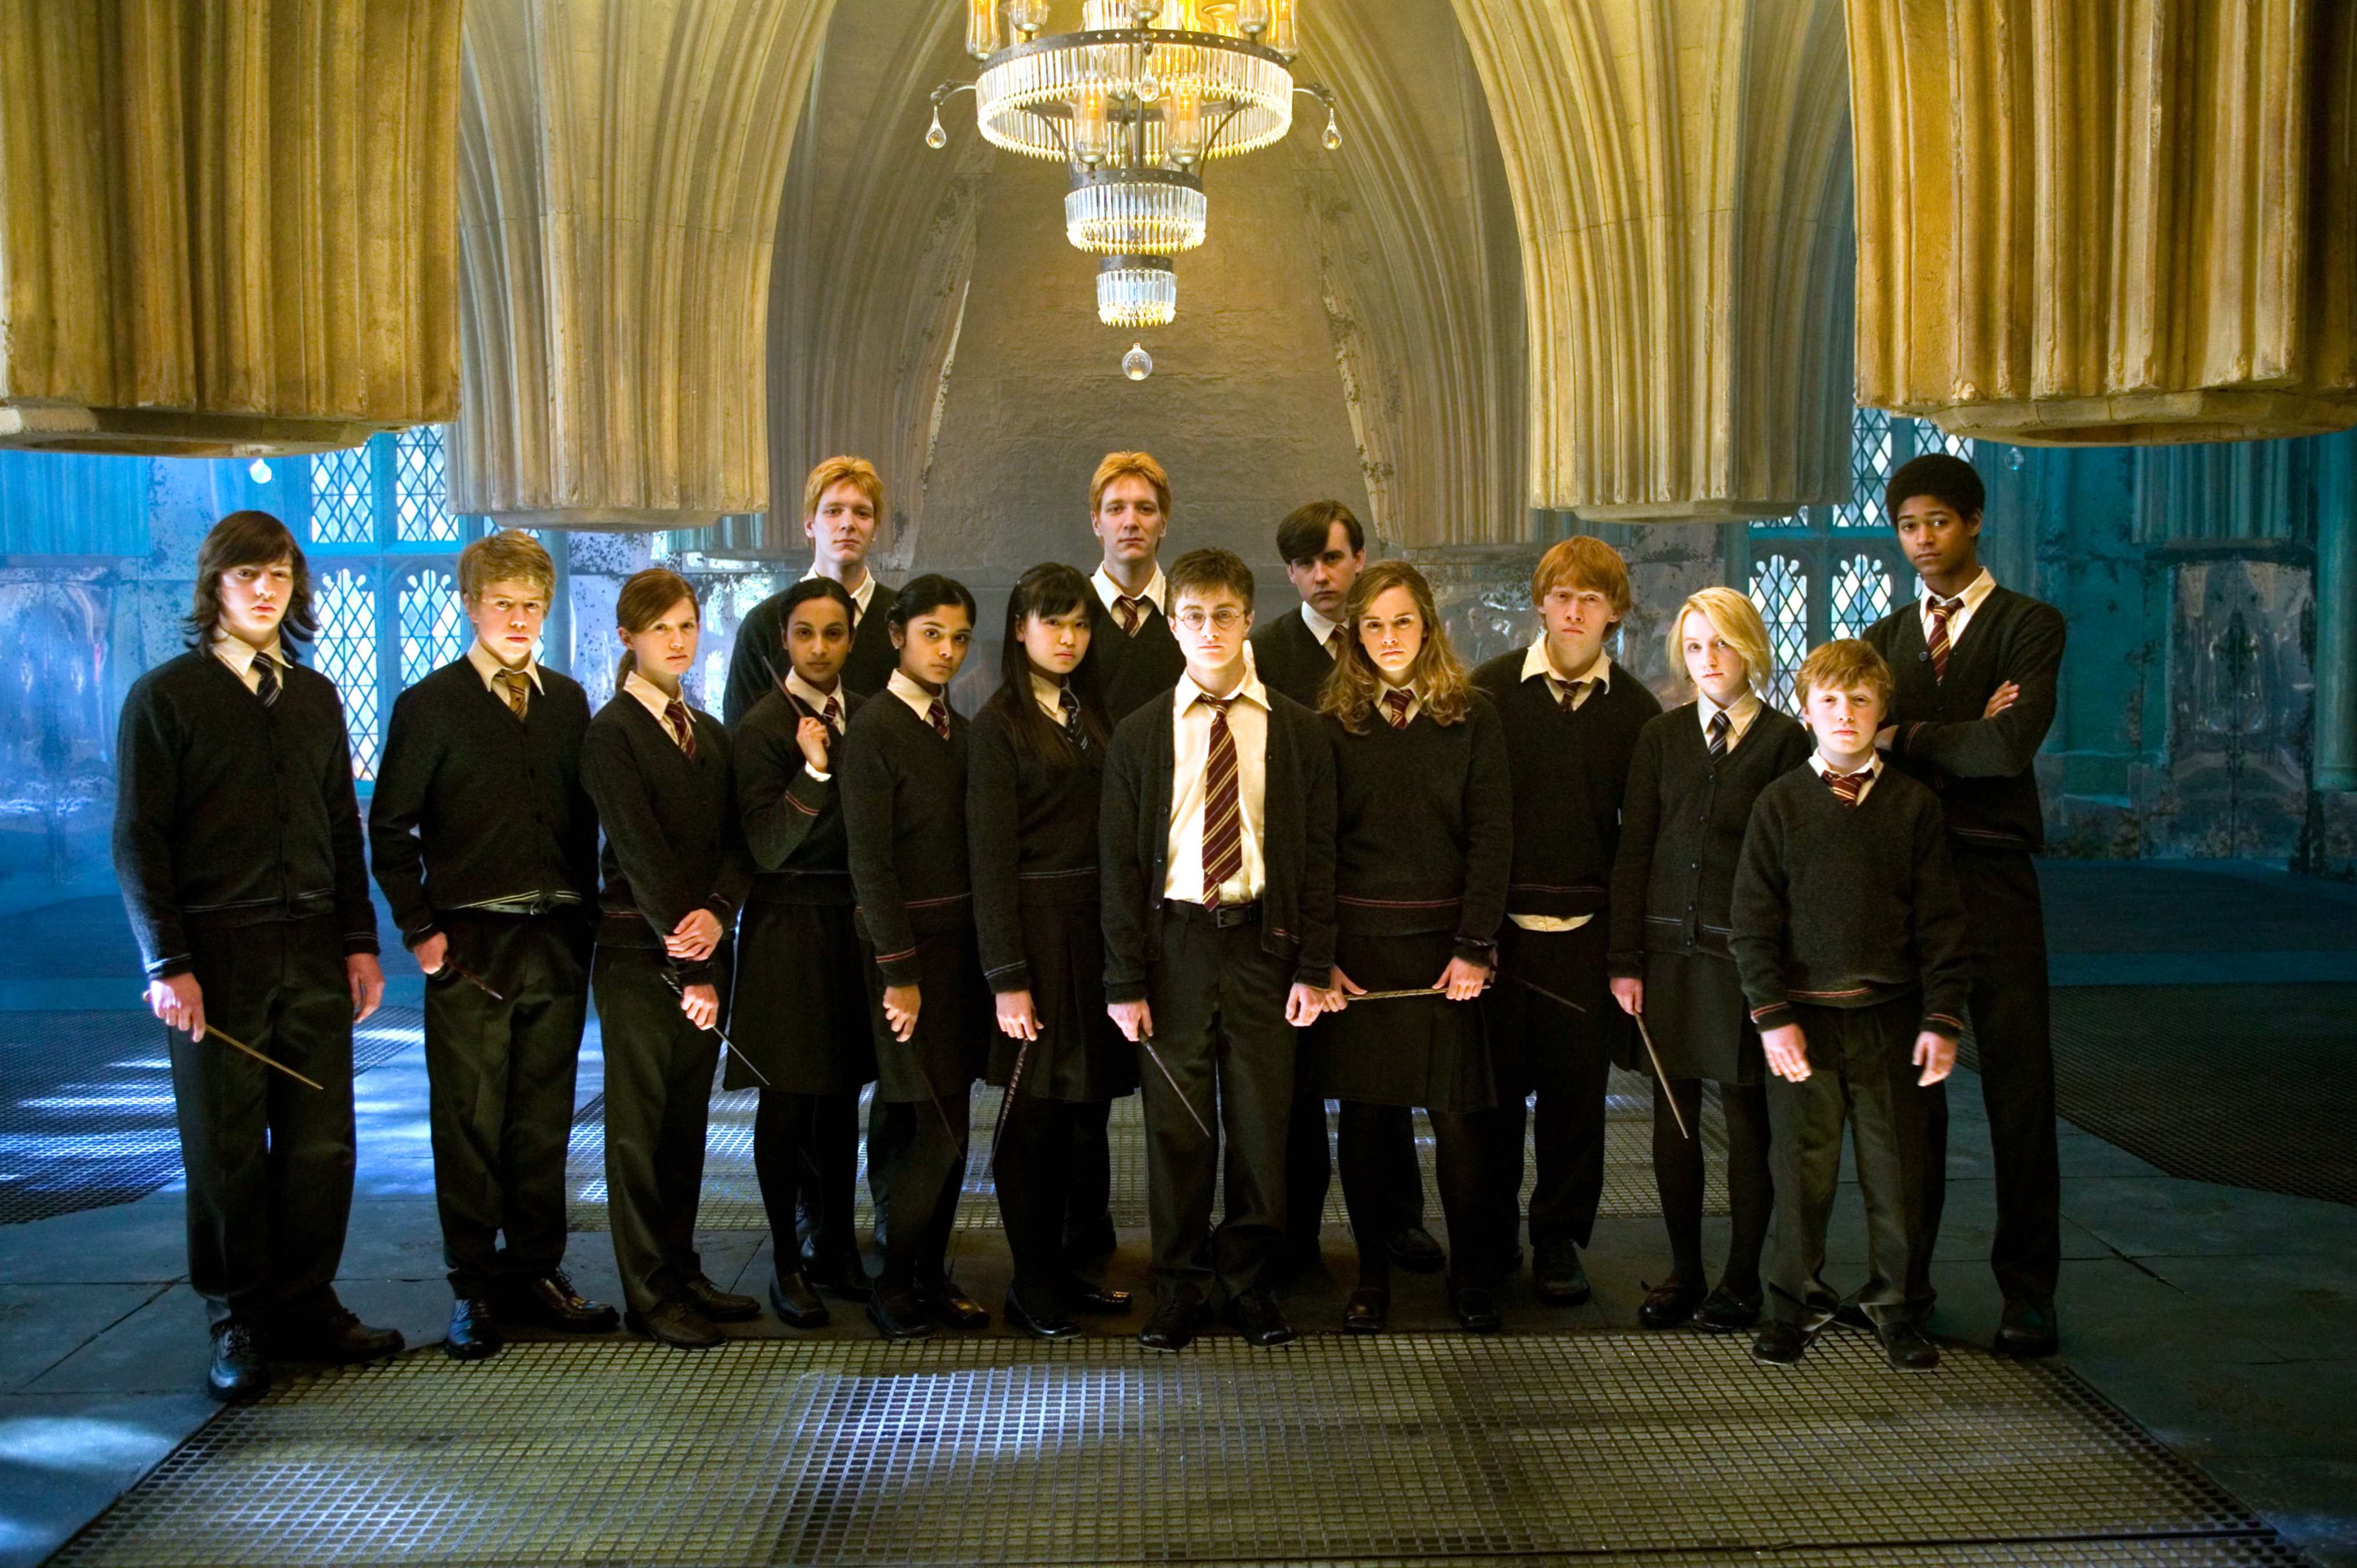 The Dumbledore's Army: United against Voldemort